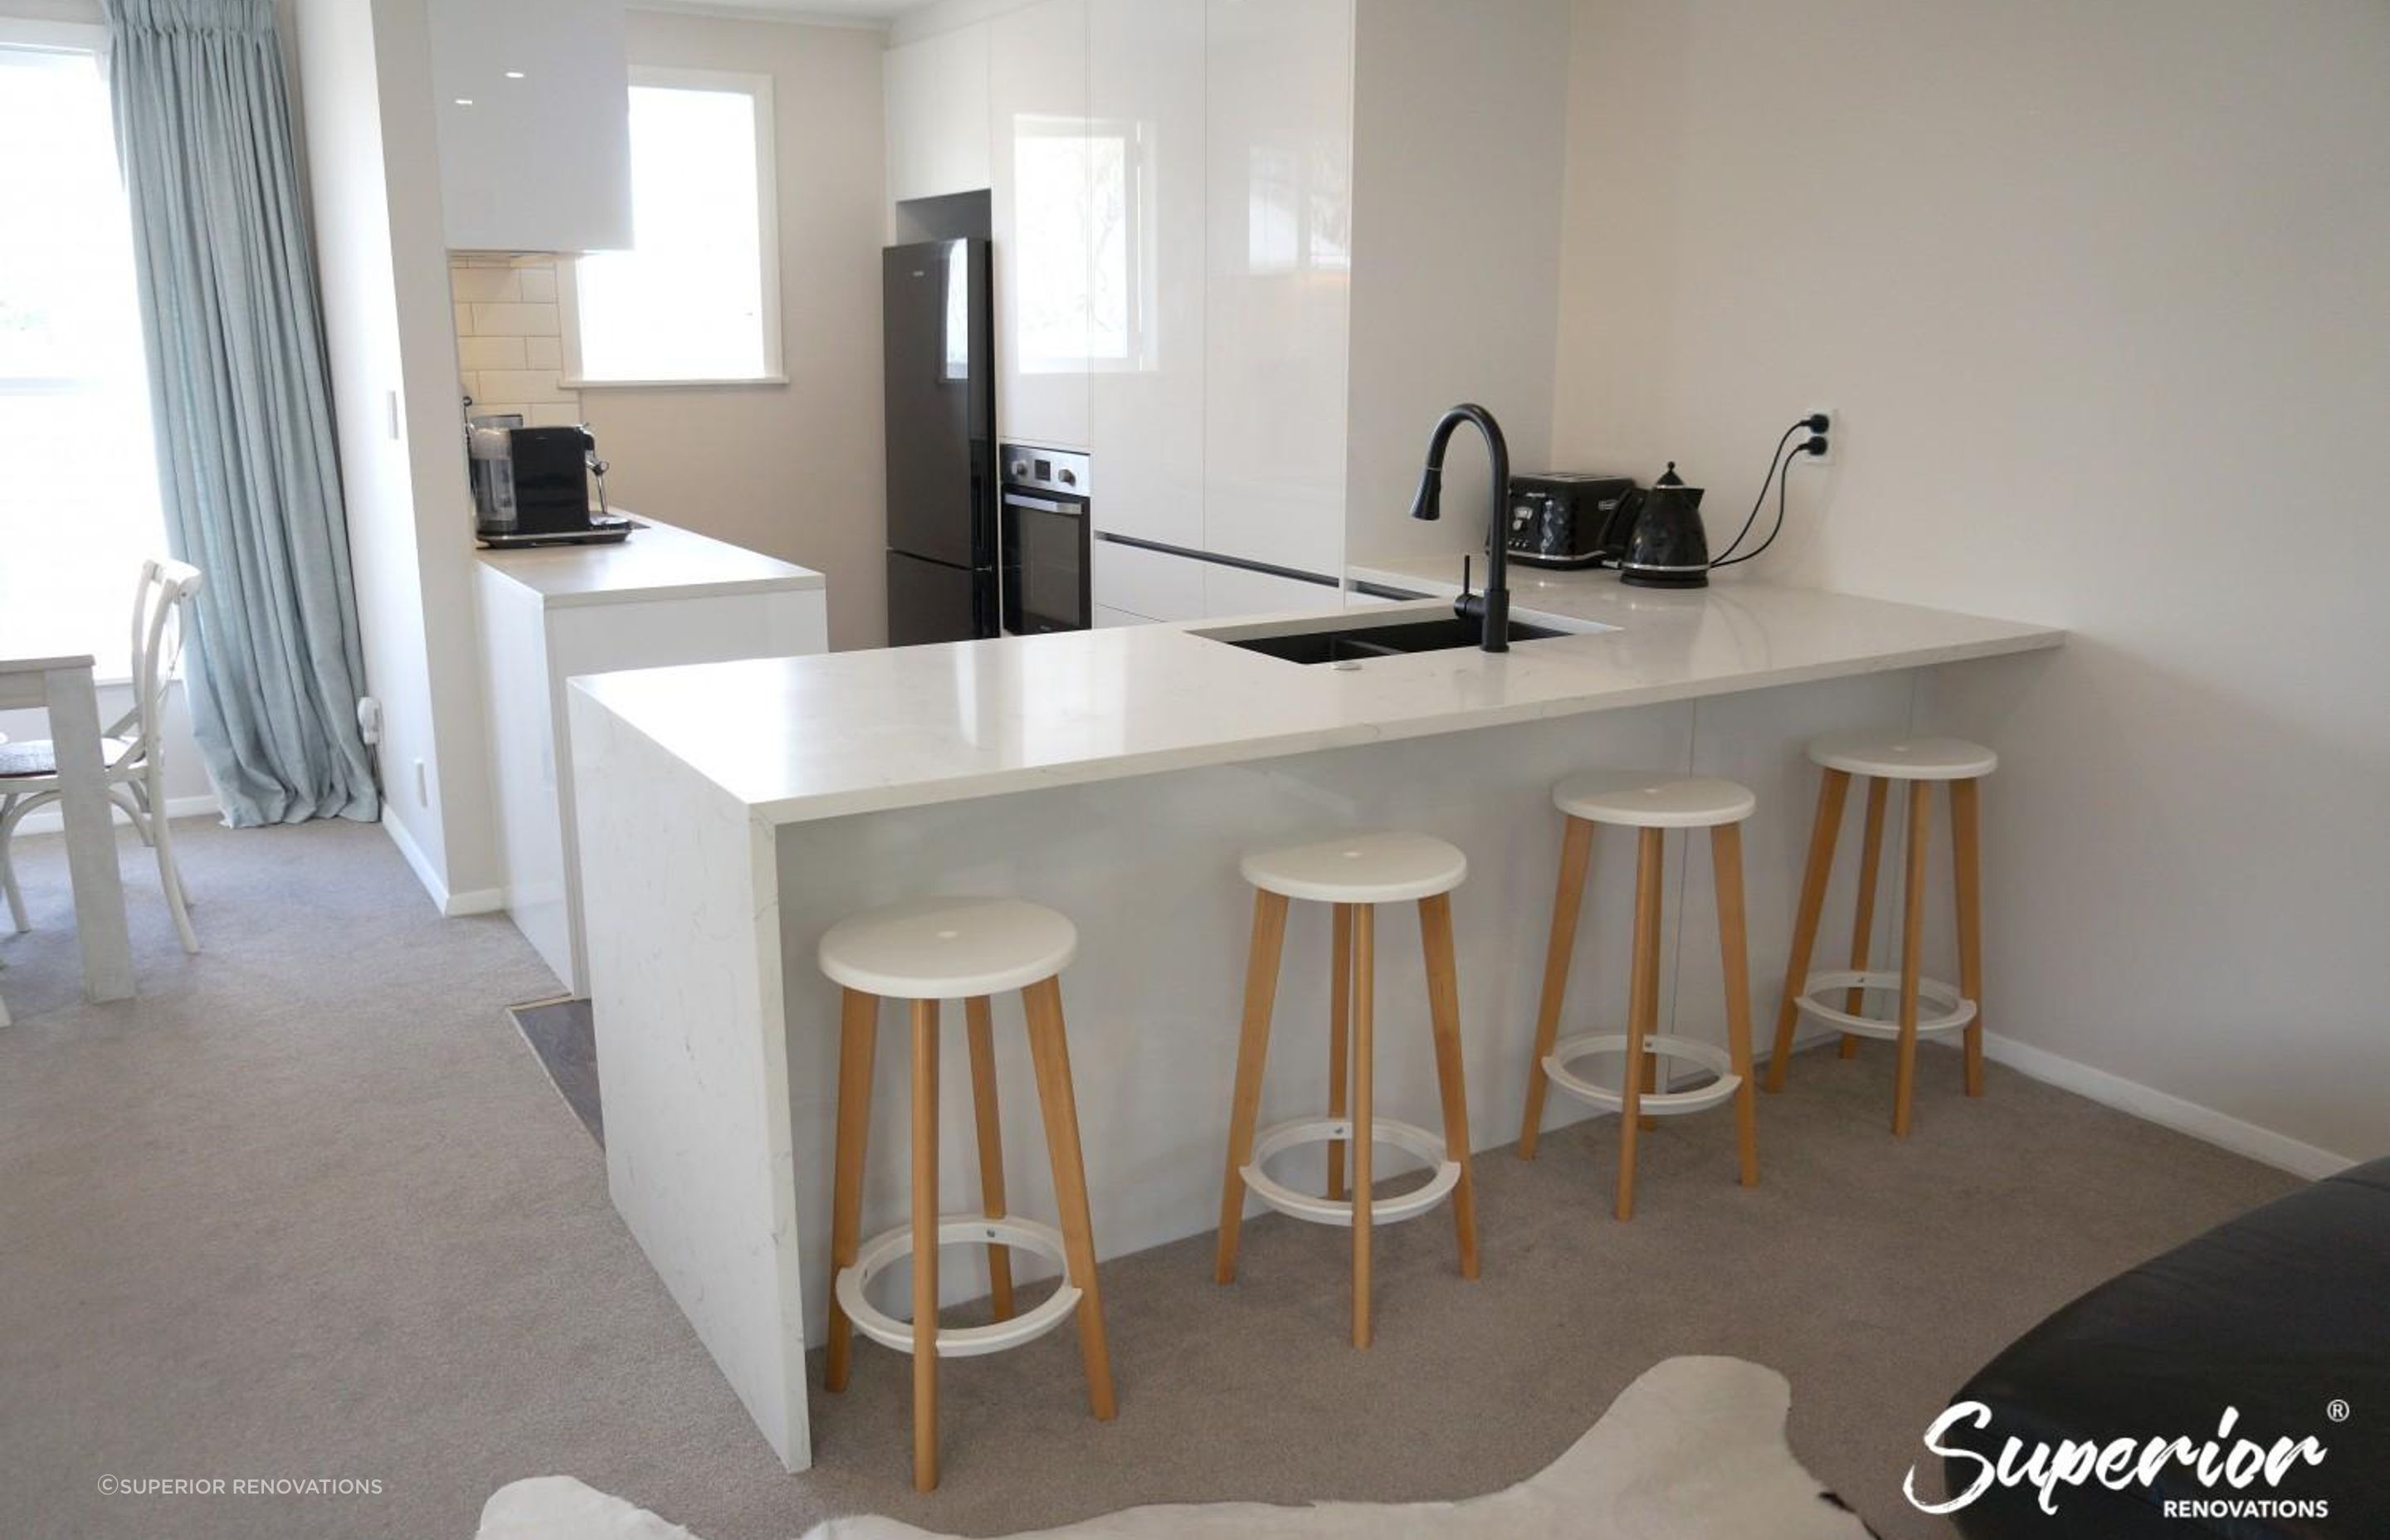 Kitchen renovation in Greenlane – The island doubles as a dining area, has a sink and counter space for prep and storage on the other side in form of cabinets